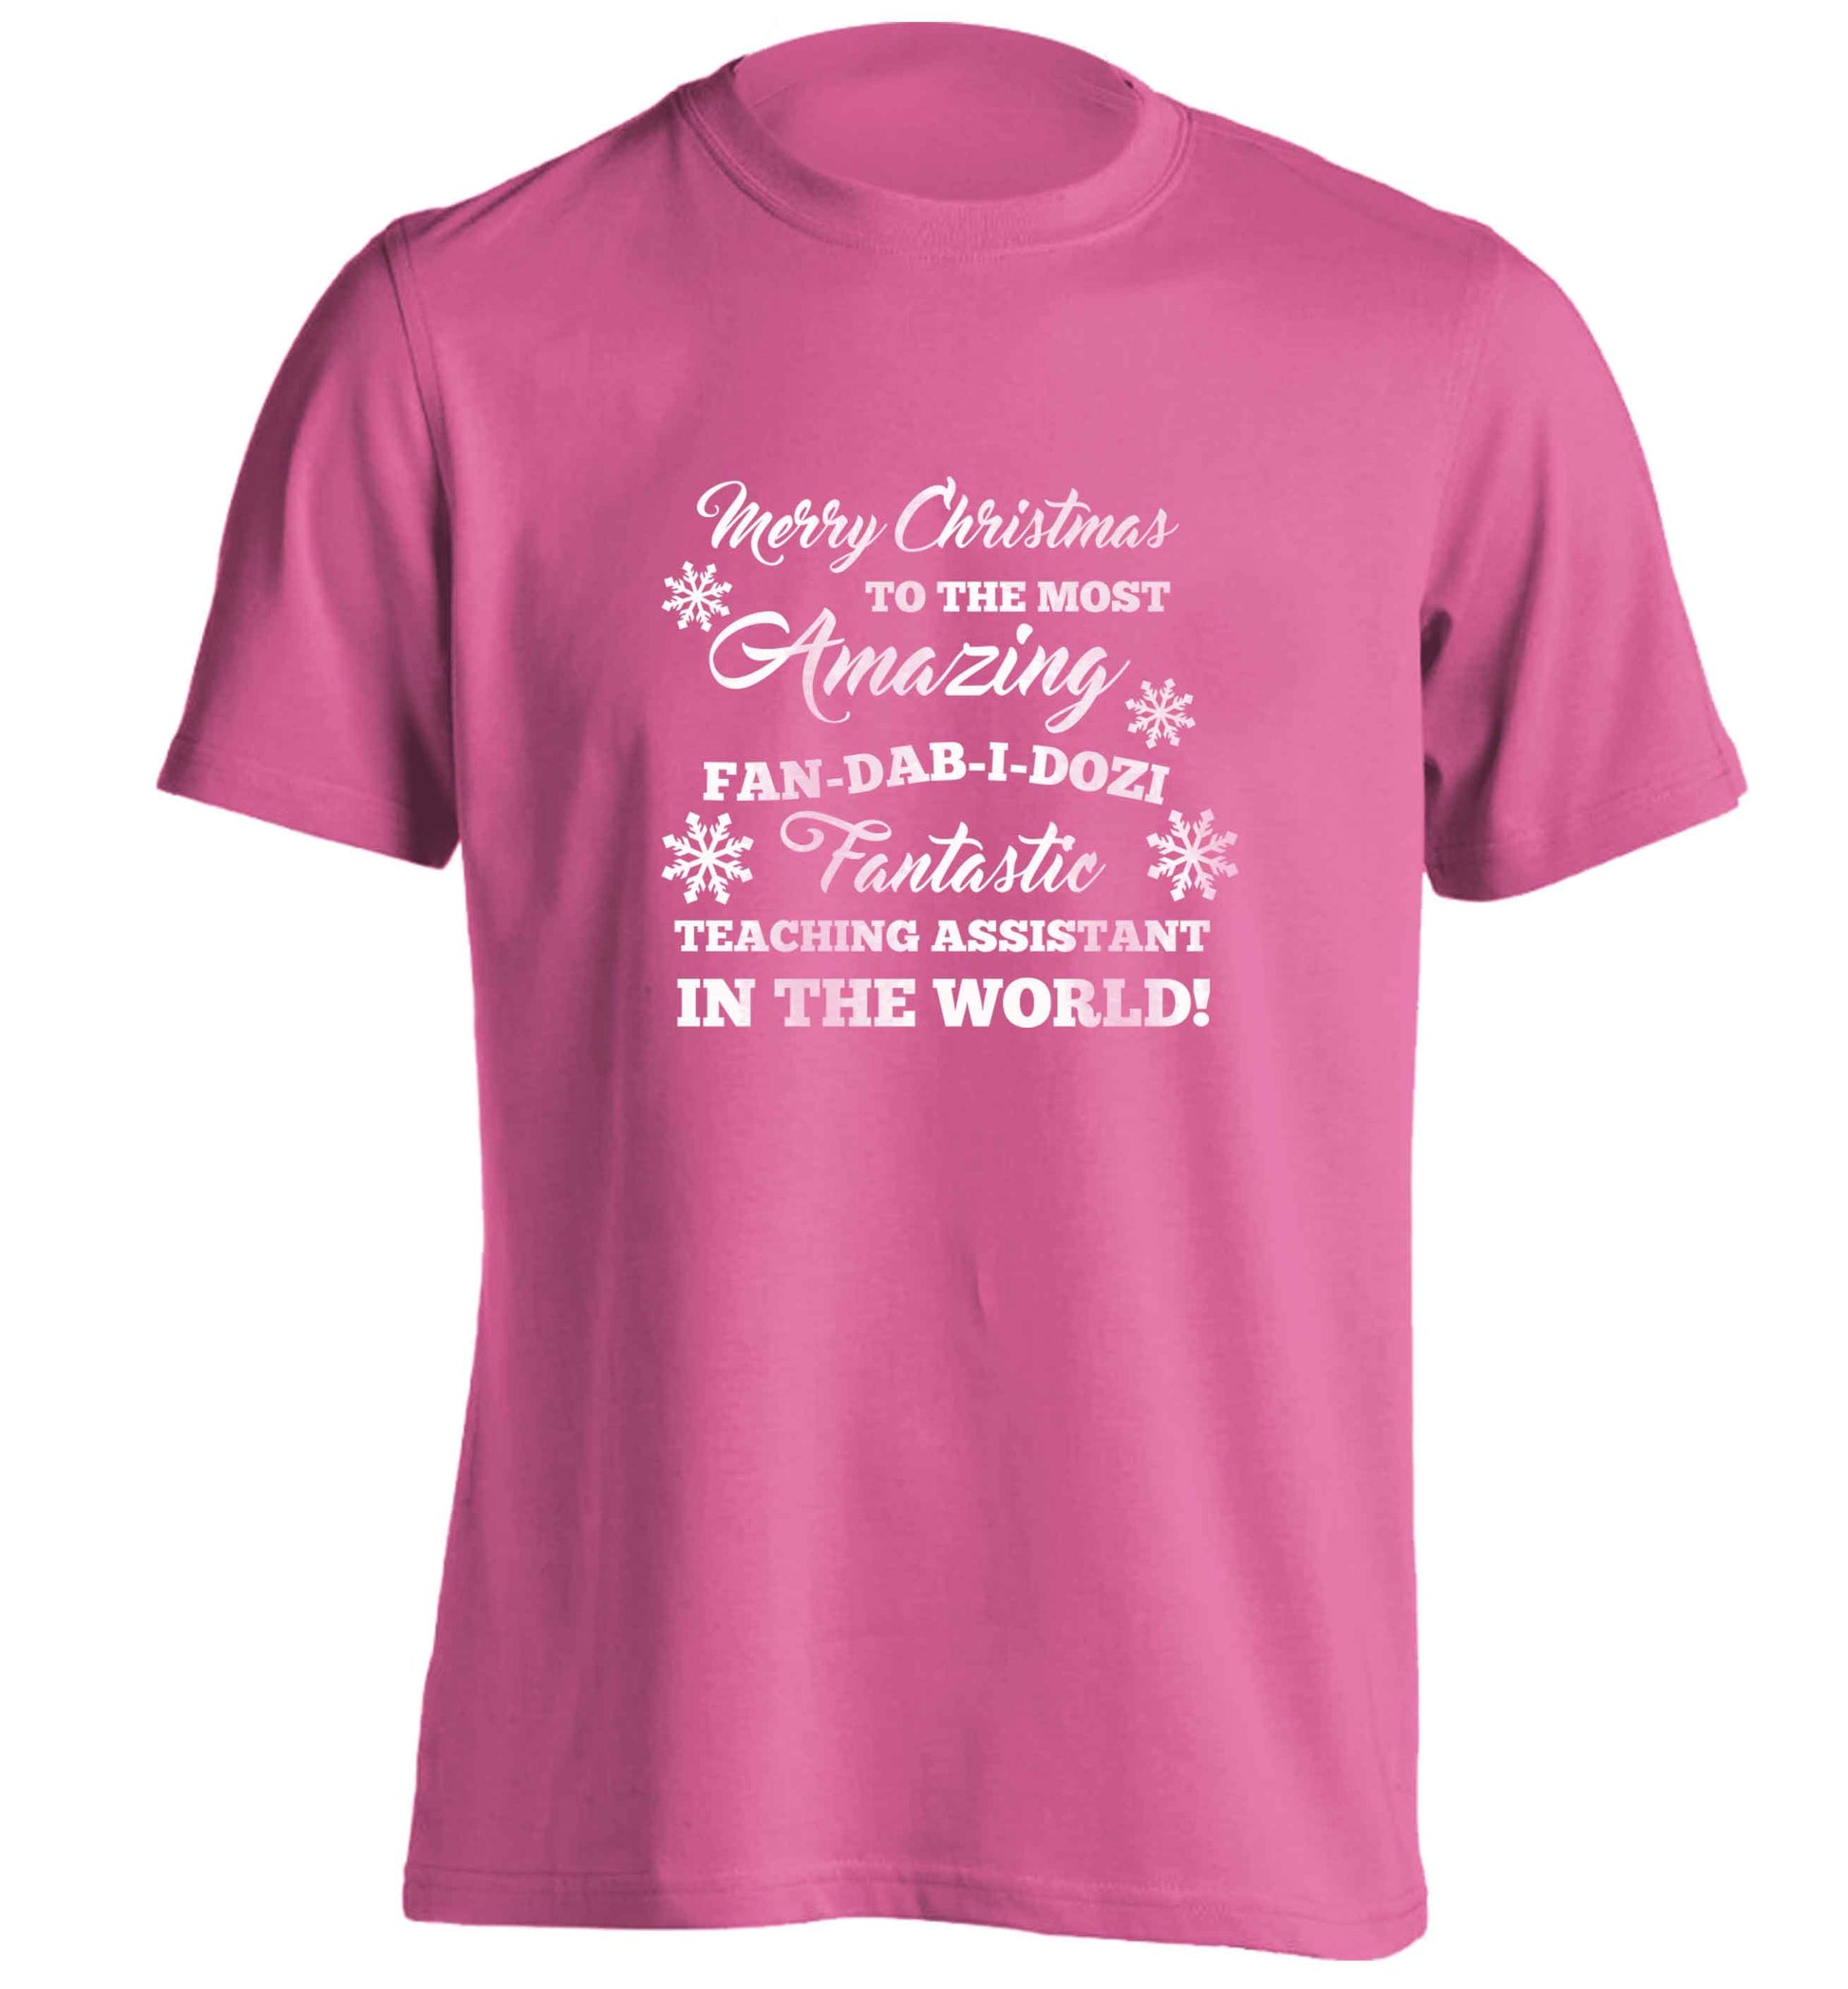 Merry Christmas to the most amazing fan-dab-i-dozi fantasic teaching assistant in the world adults unisex pink Tshirt 2XL